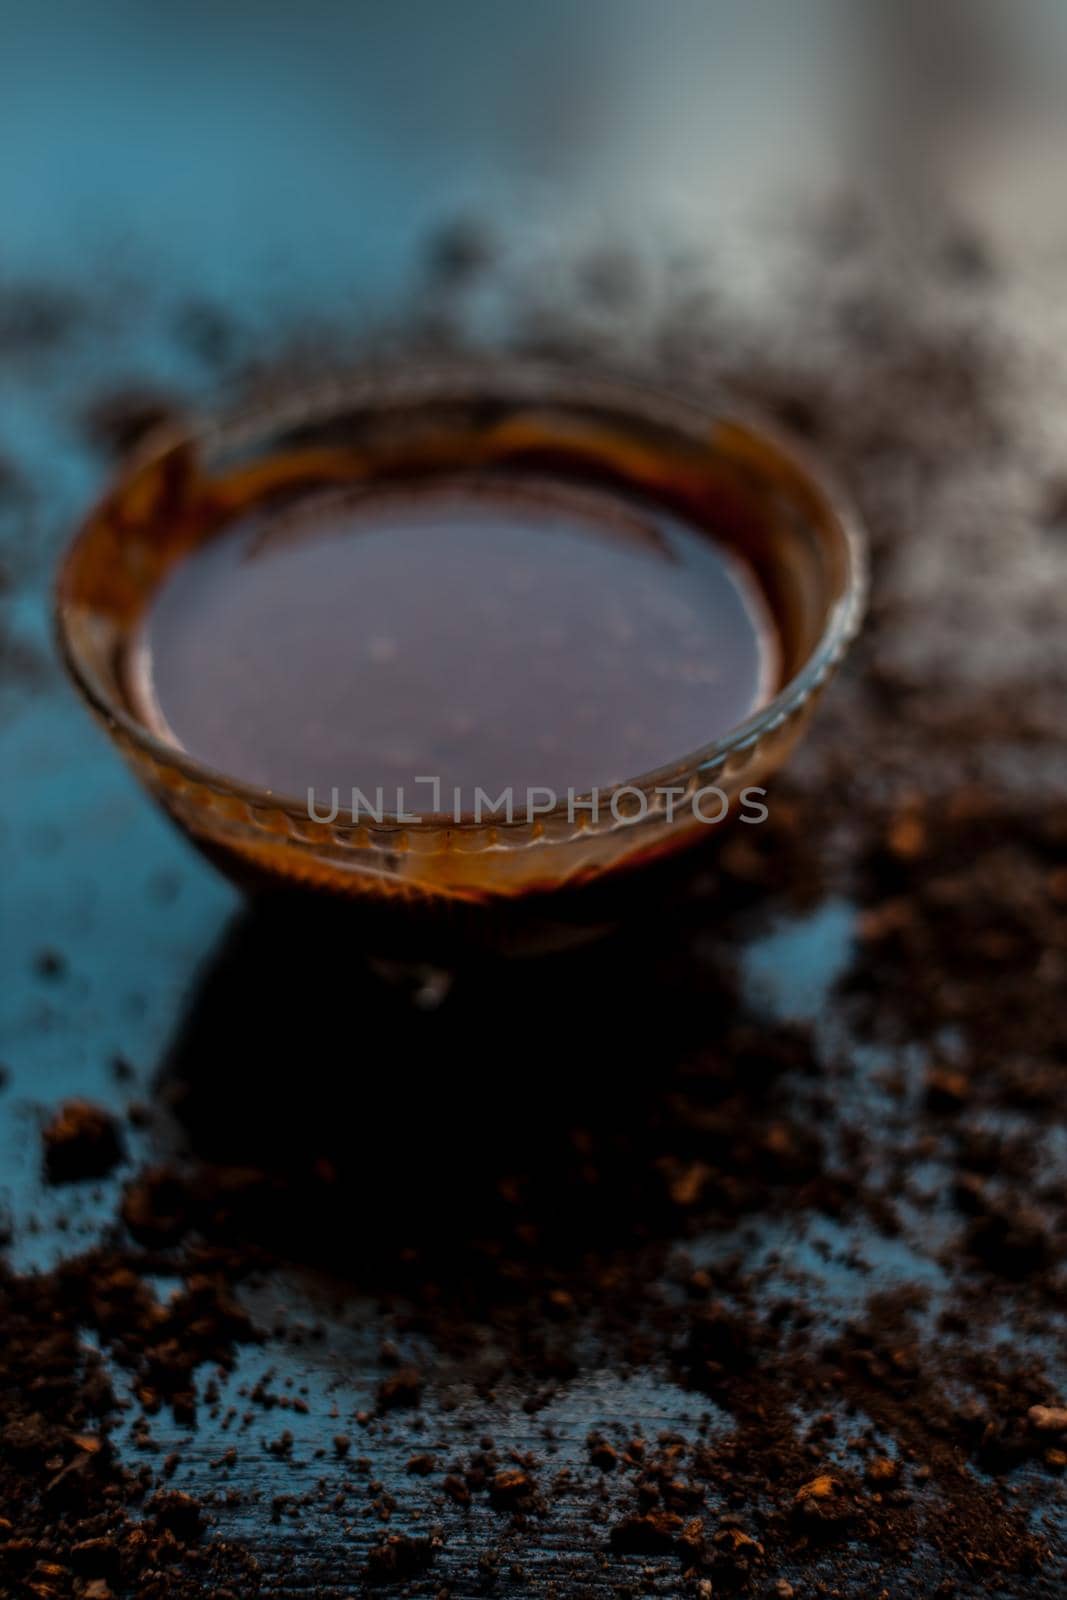 A bowl full of chocolate milk on a black wooden surface with some raw cocoa powder sprinkled around it. by mirzamlk